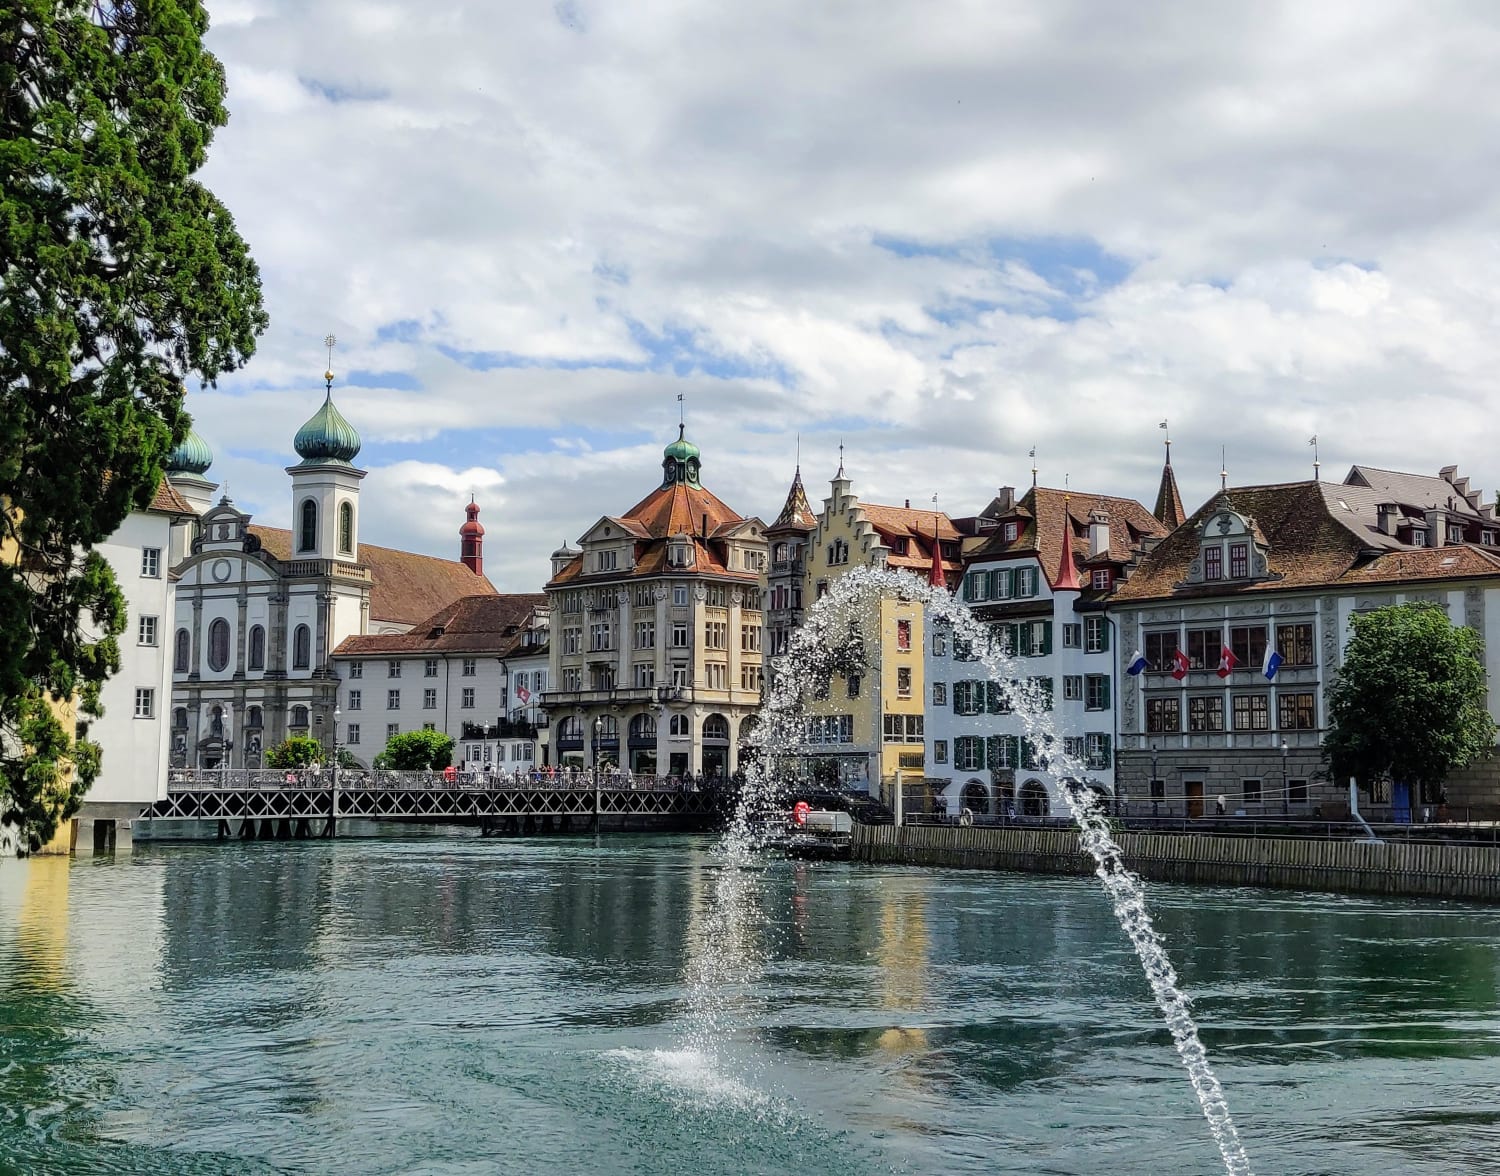 The beautiful old buildings in Lucern, Switzerland